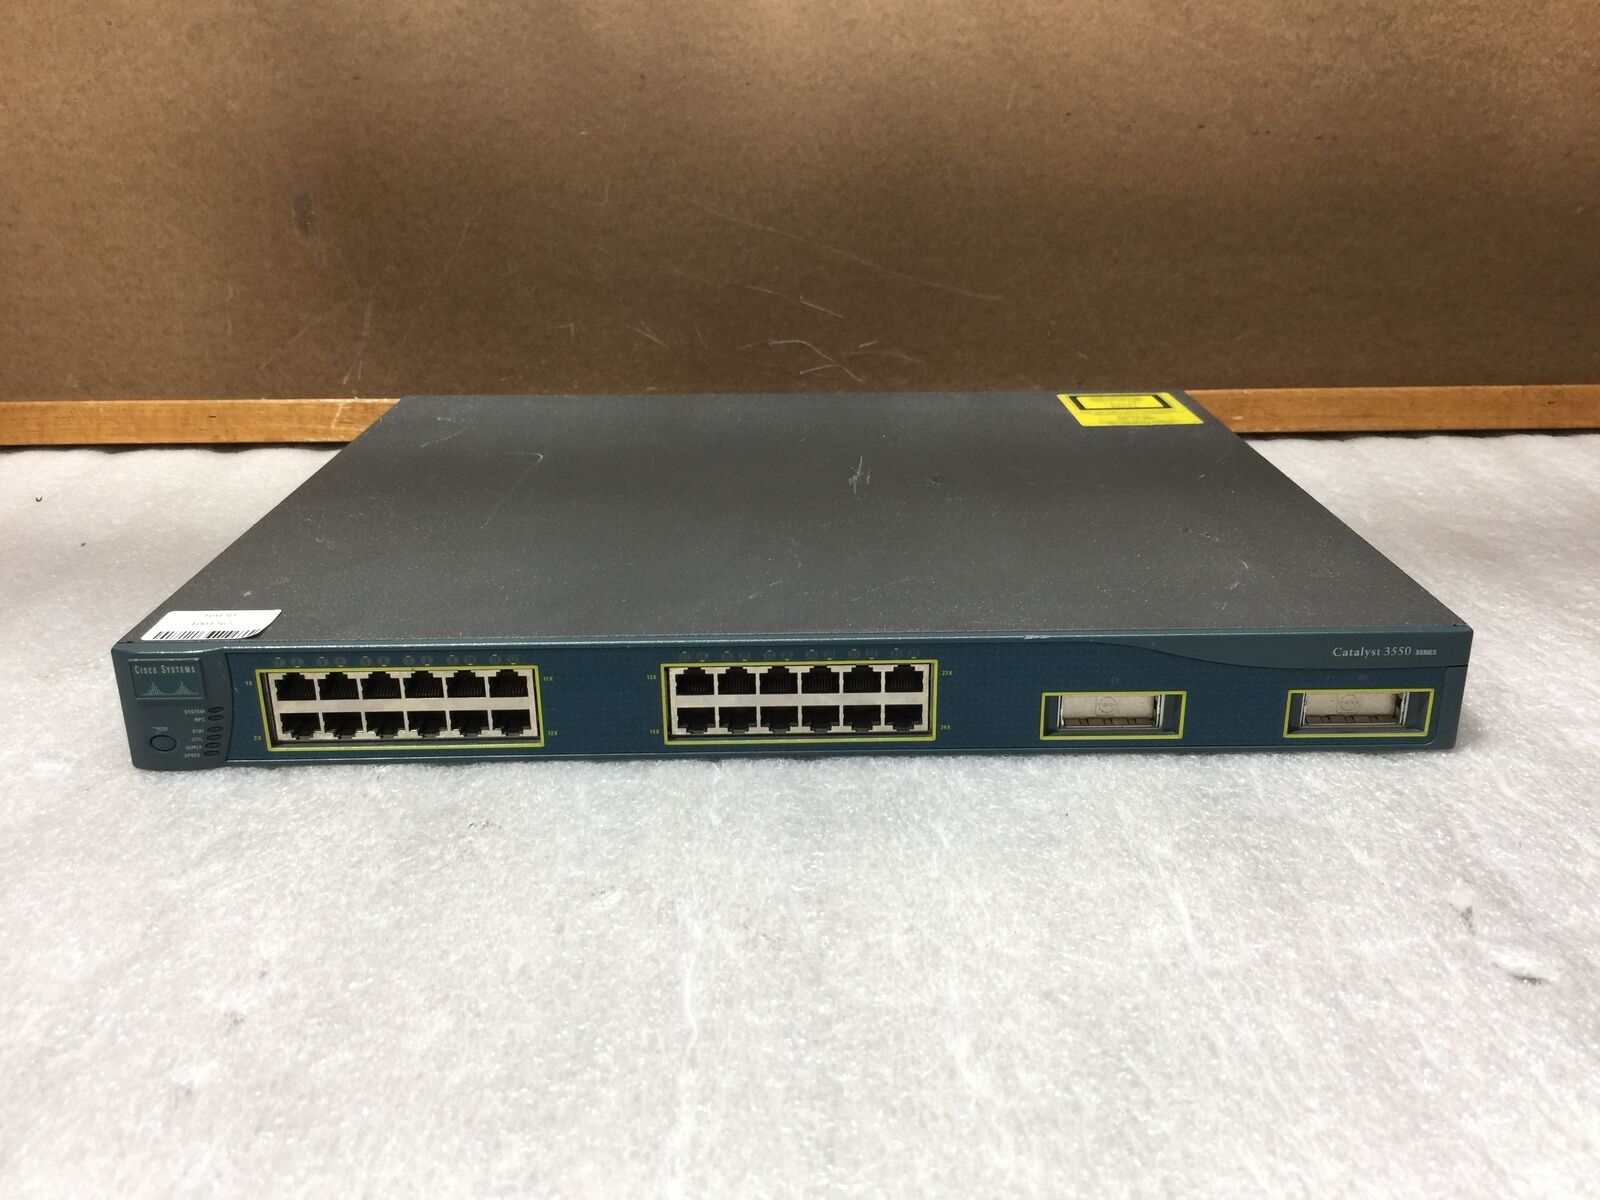 CISCO WS-C3550-24PWR-SMI CATALYST 3550 24 PORT POE SWITCH, Tested and Working